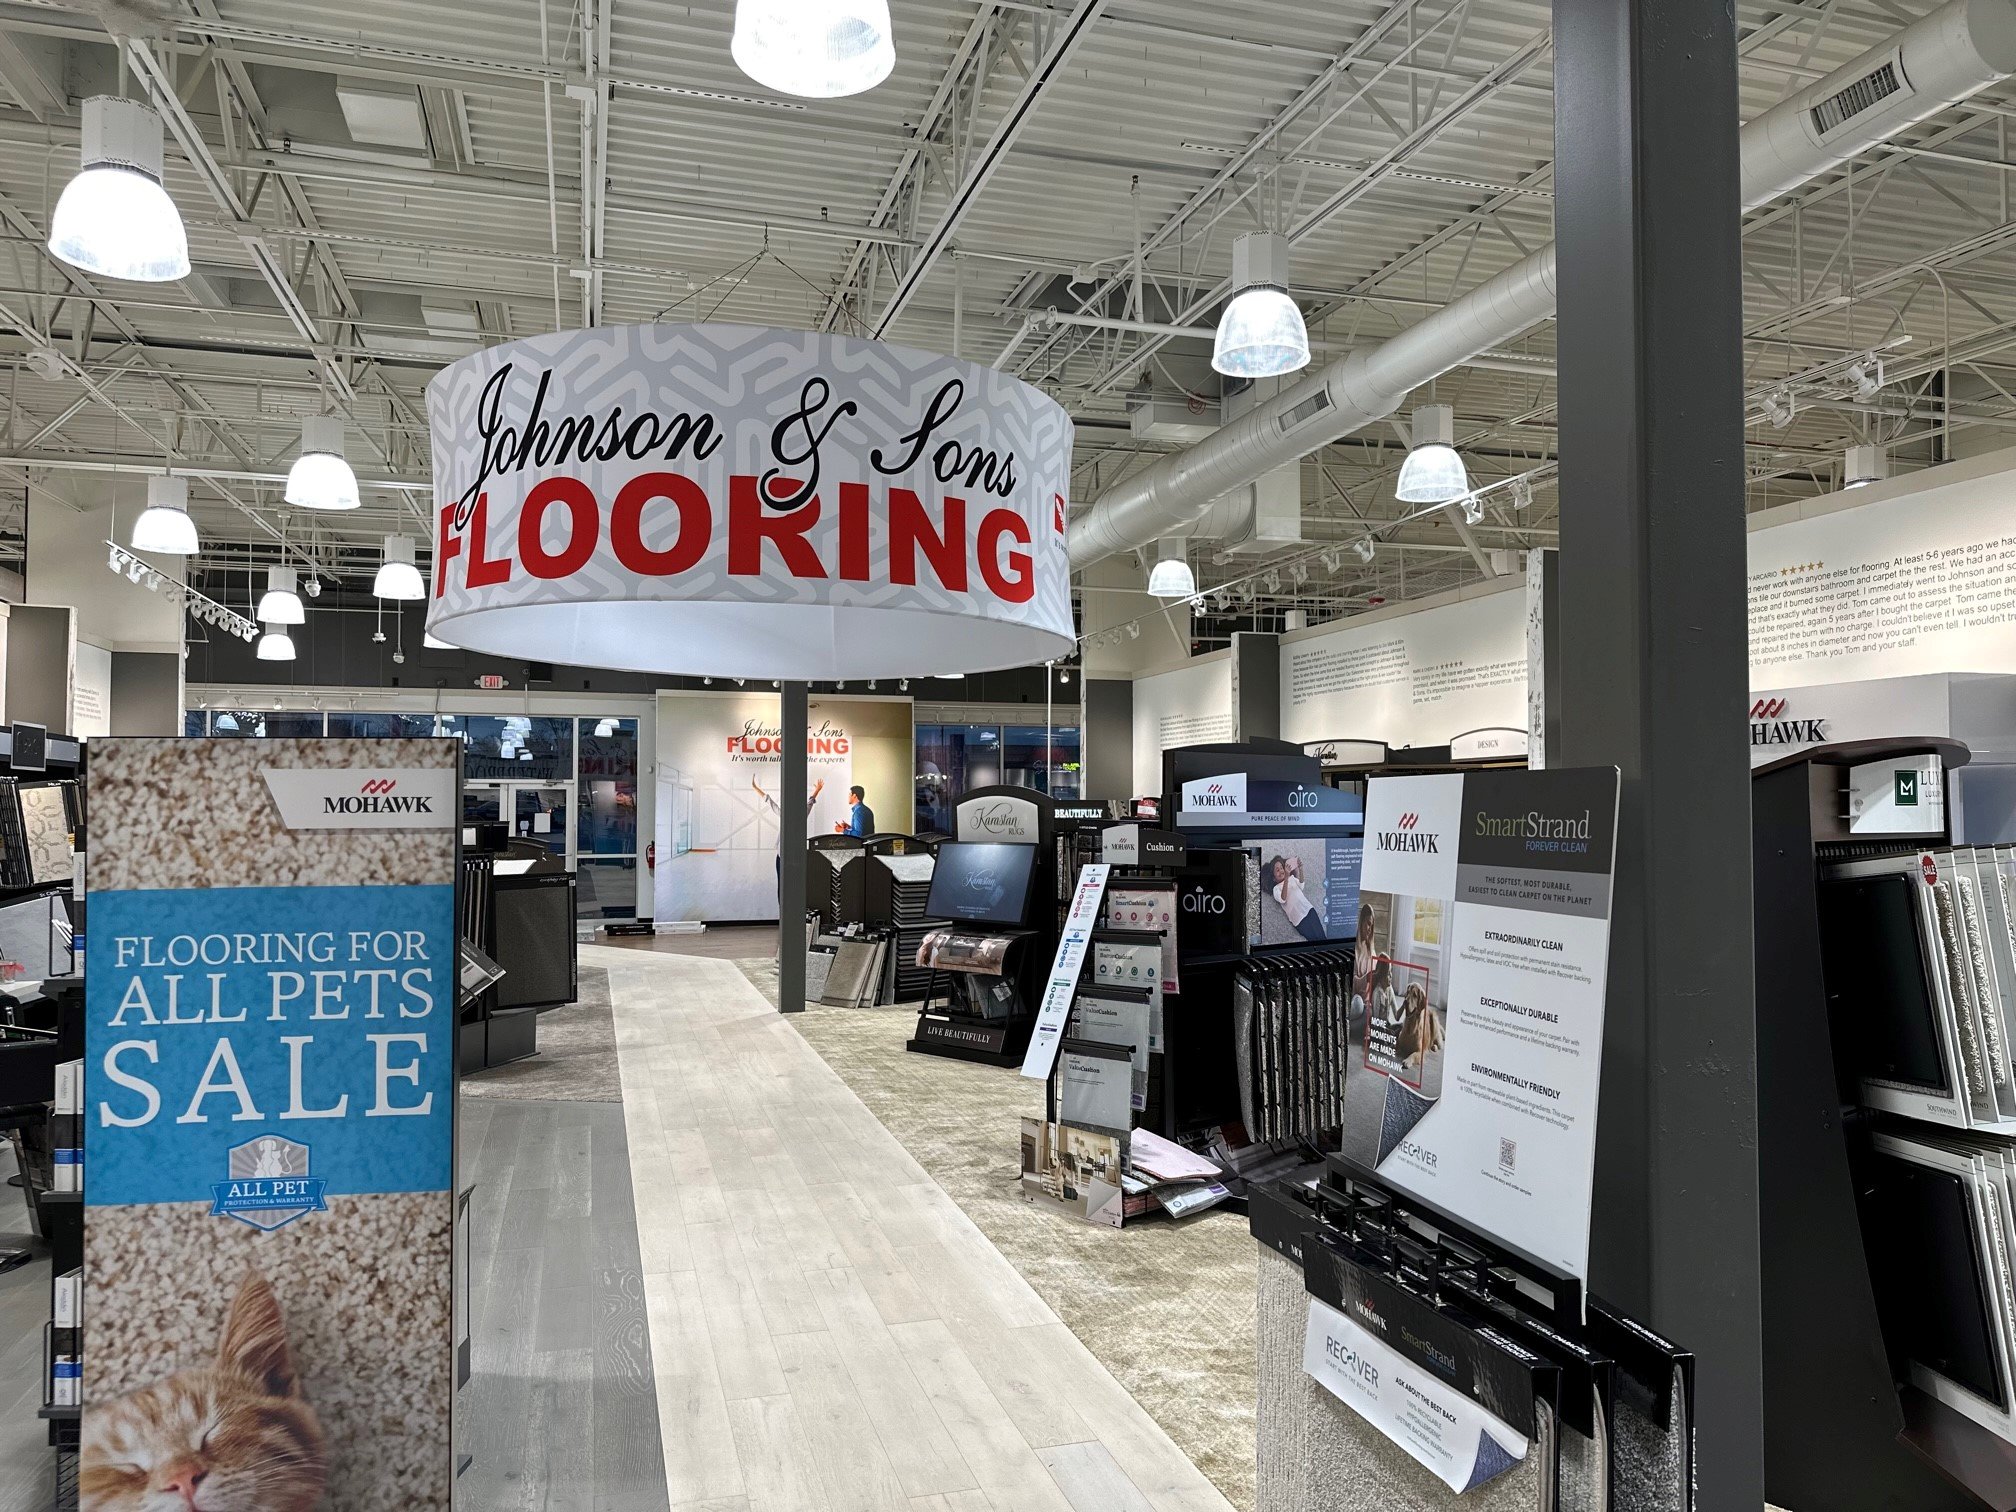 Our flooring showroom by Johnson & Sons Flooring in Knoxville, TN